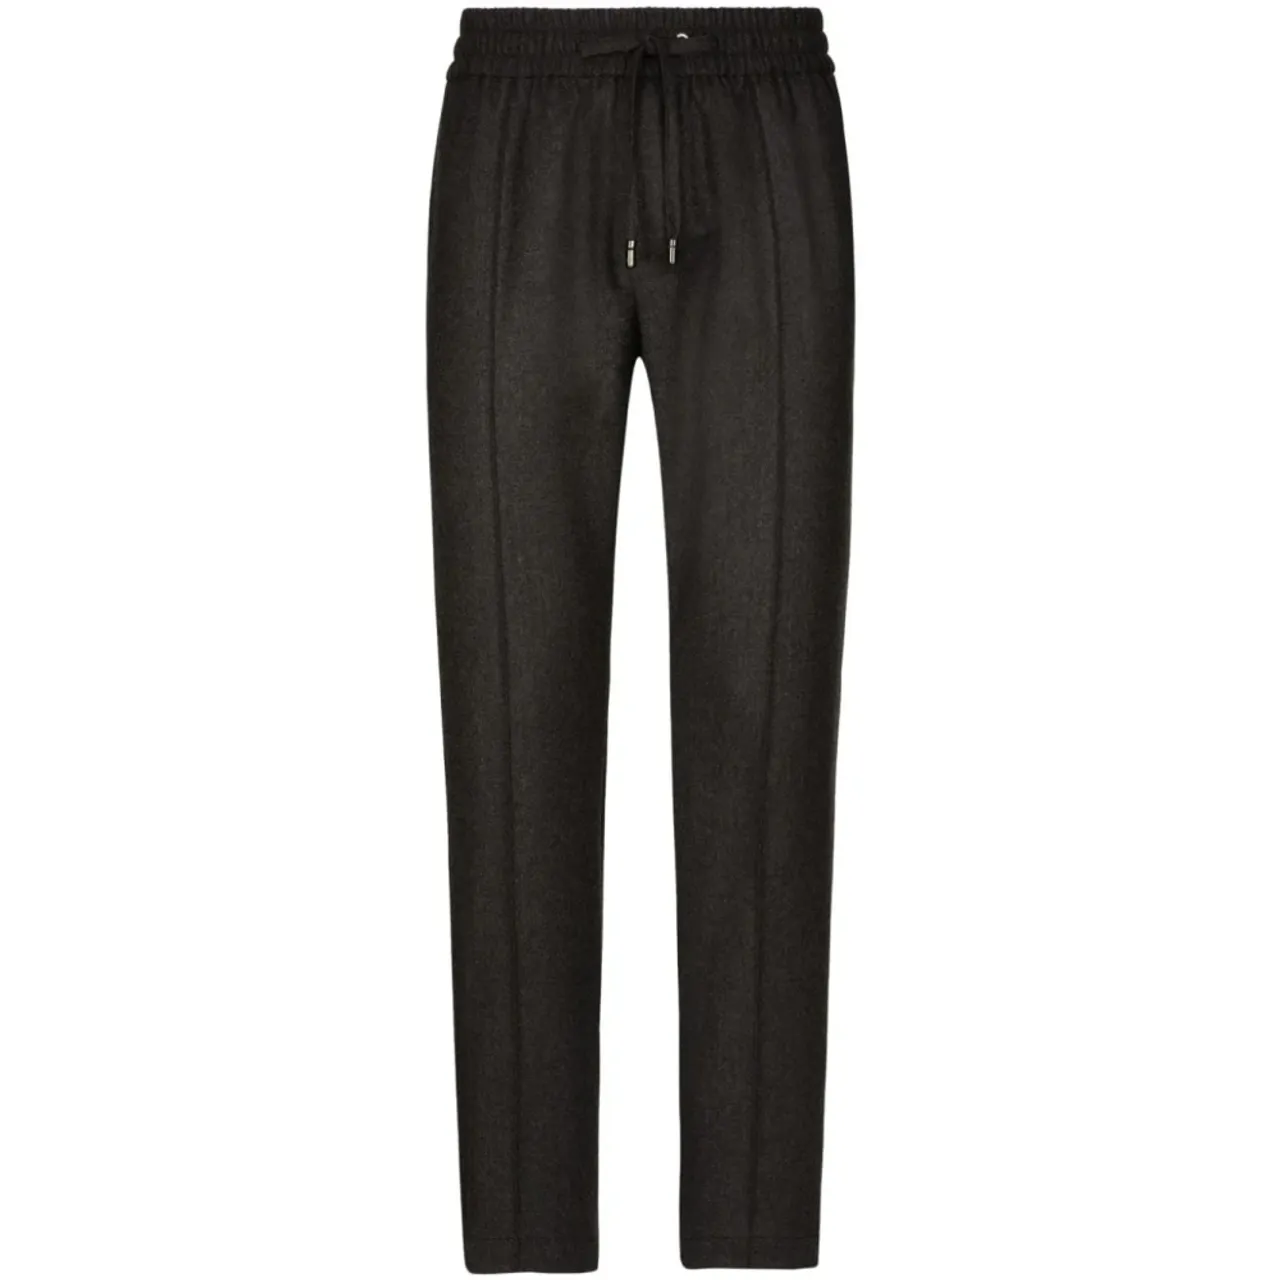 Dolce & Gabbana , Charcoal Grey Wool Trousers with Drawstring Waistband ,Gray male, Sizes: